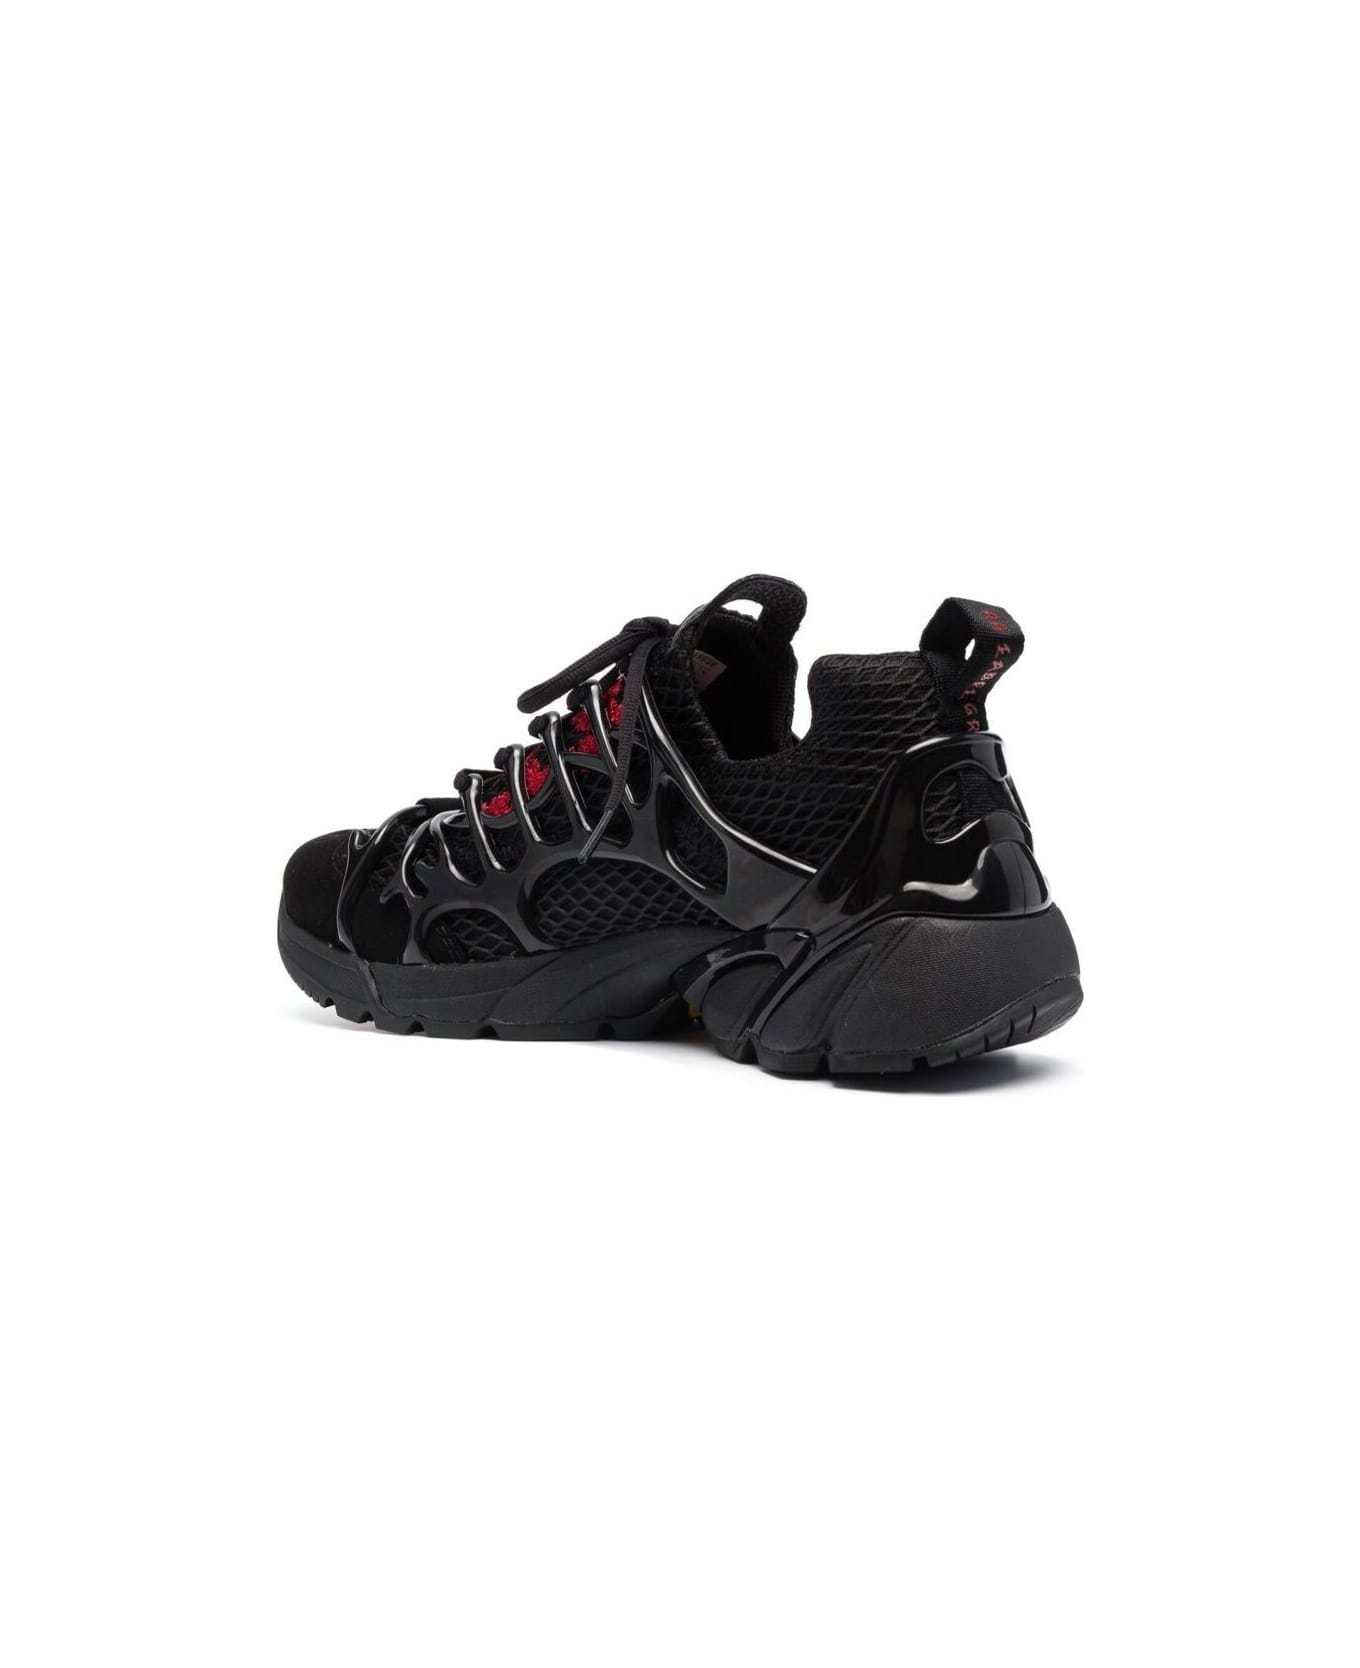 44 Label Group Black Low Top Sneakers With Mesh Panelling In Polyamide Man 44 Label Group - Black